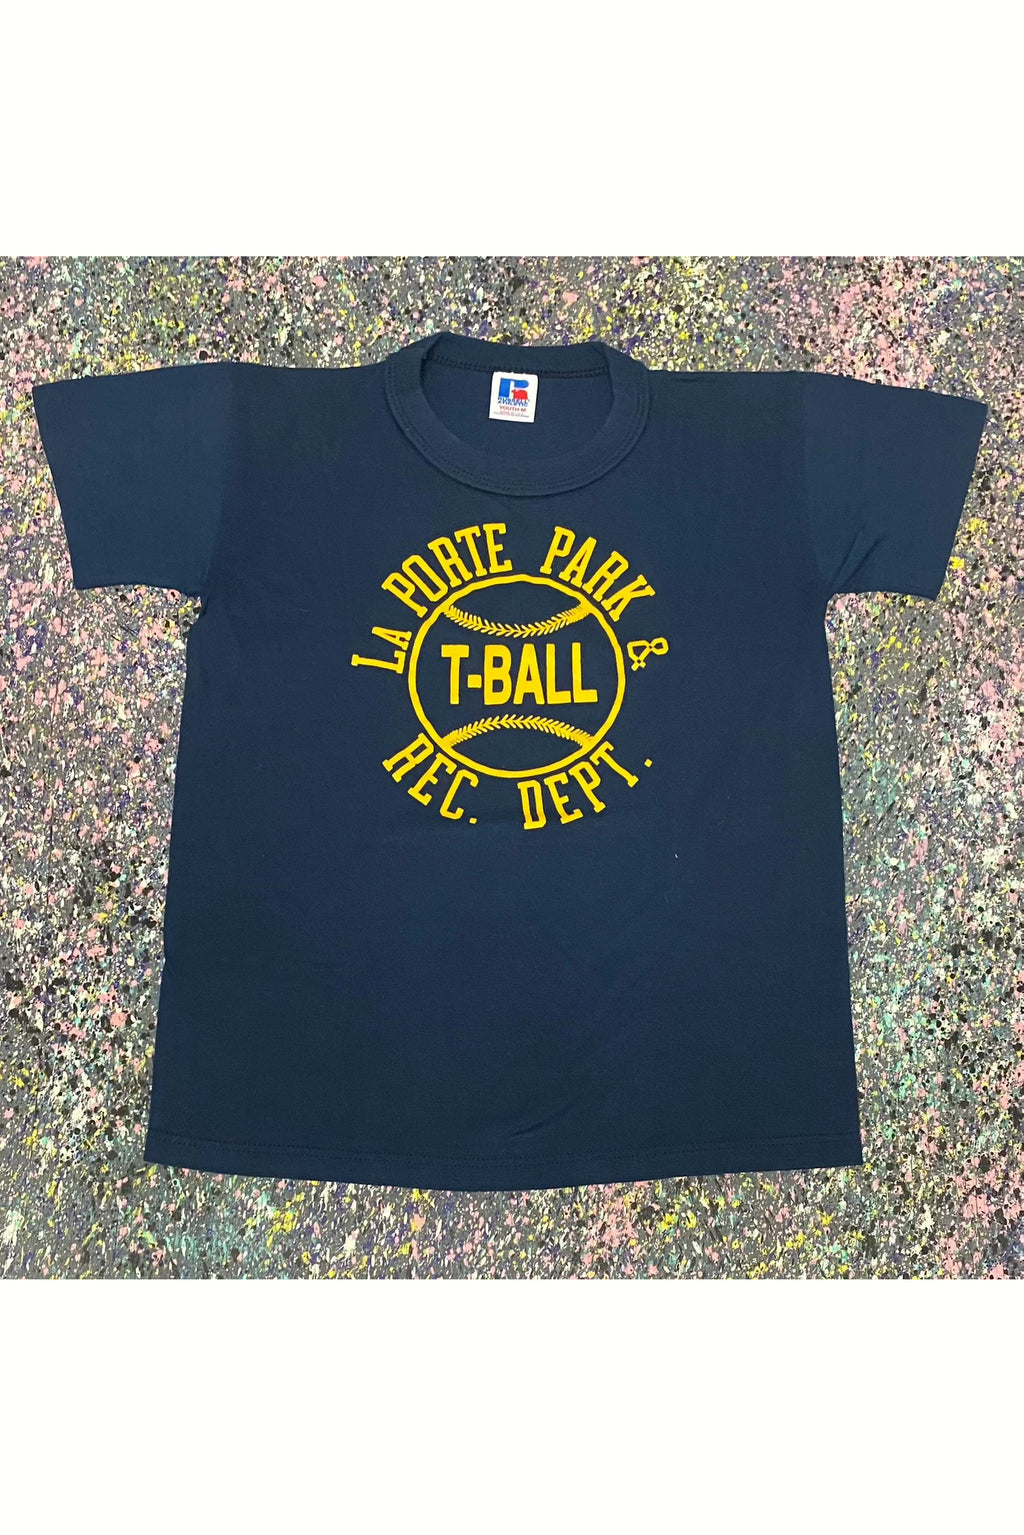 Vintage Made In USA Russell LaPorte Park & Rec. Dept. T-Ball Tee- YTH M